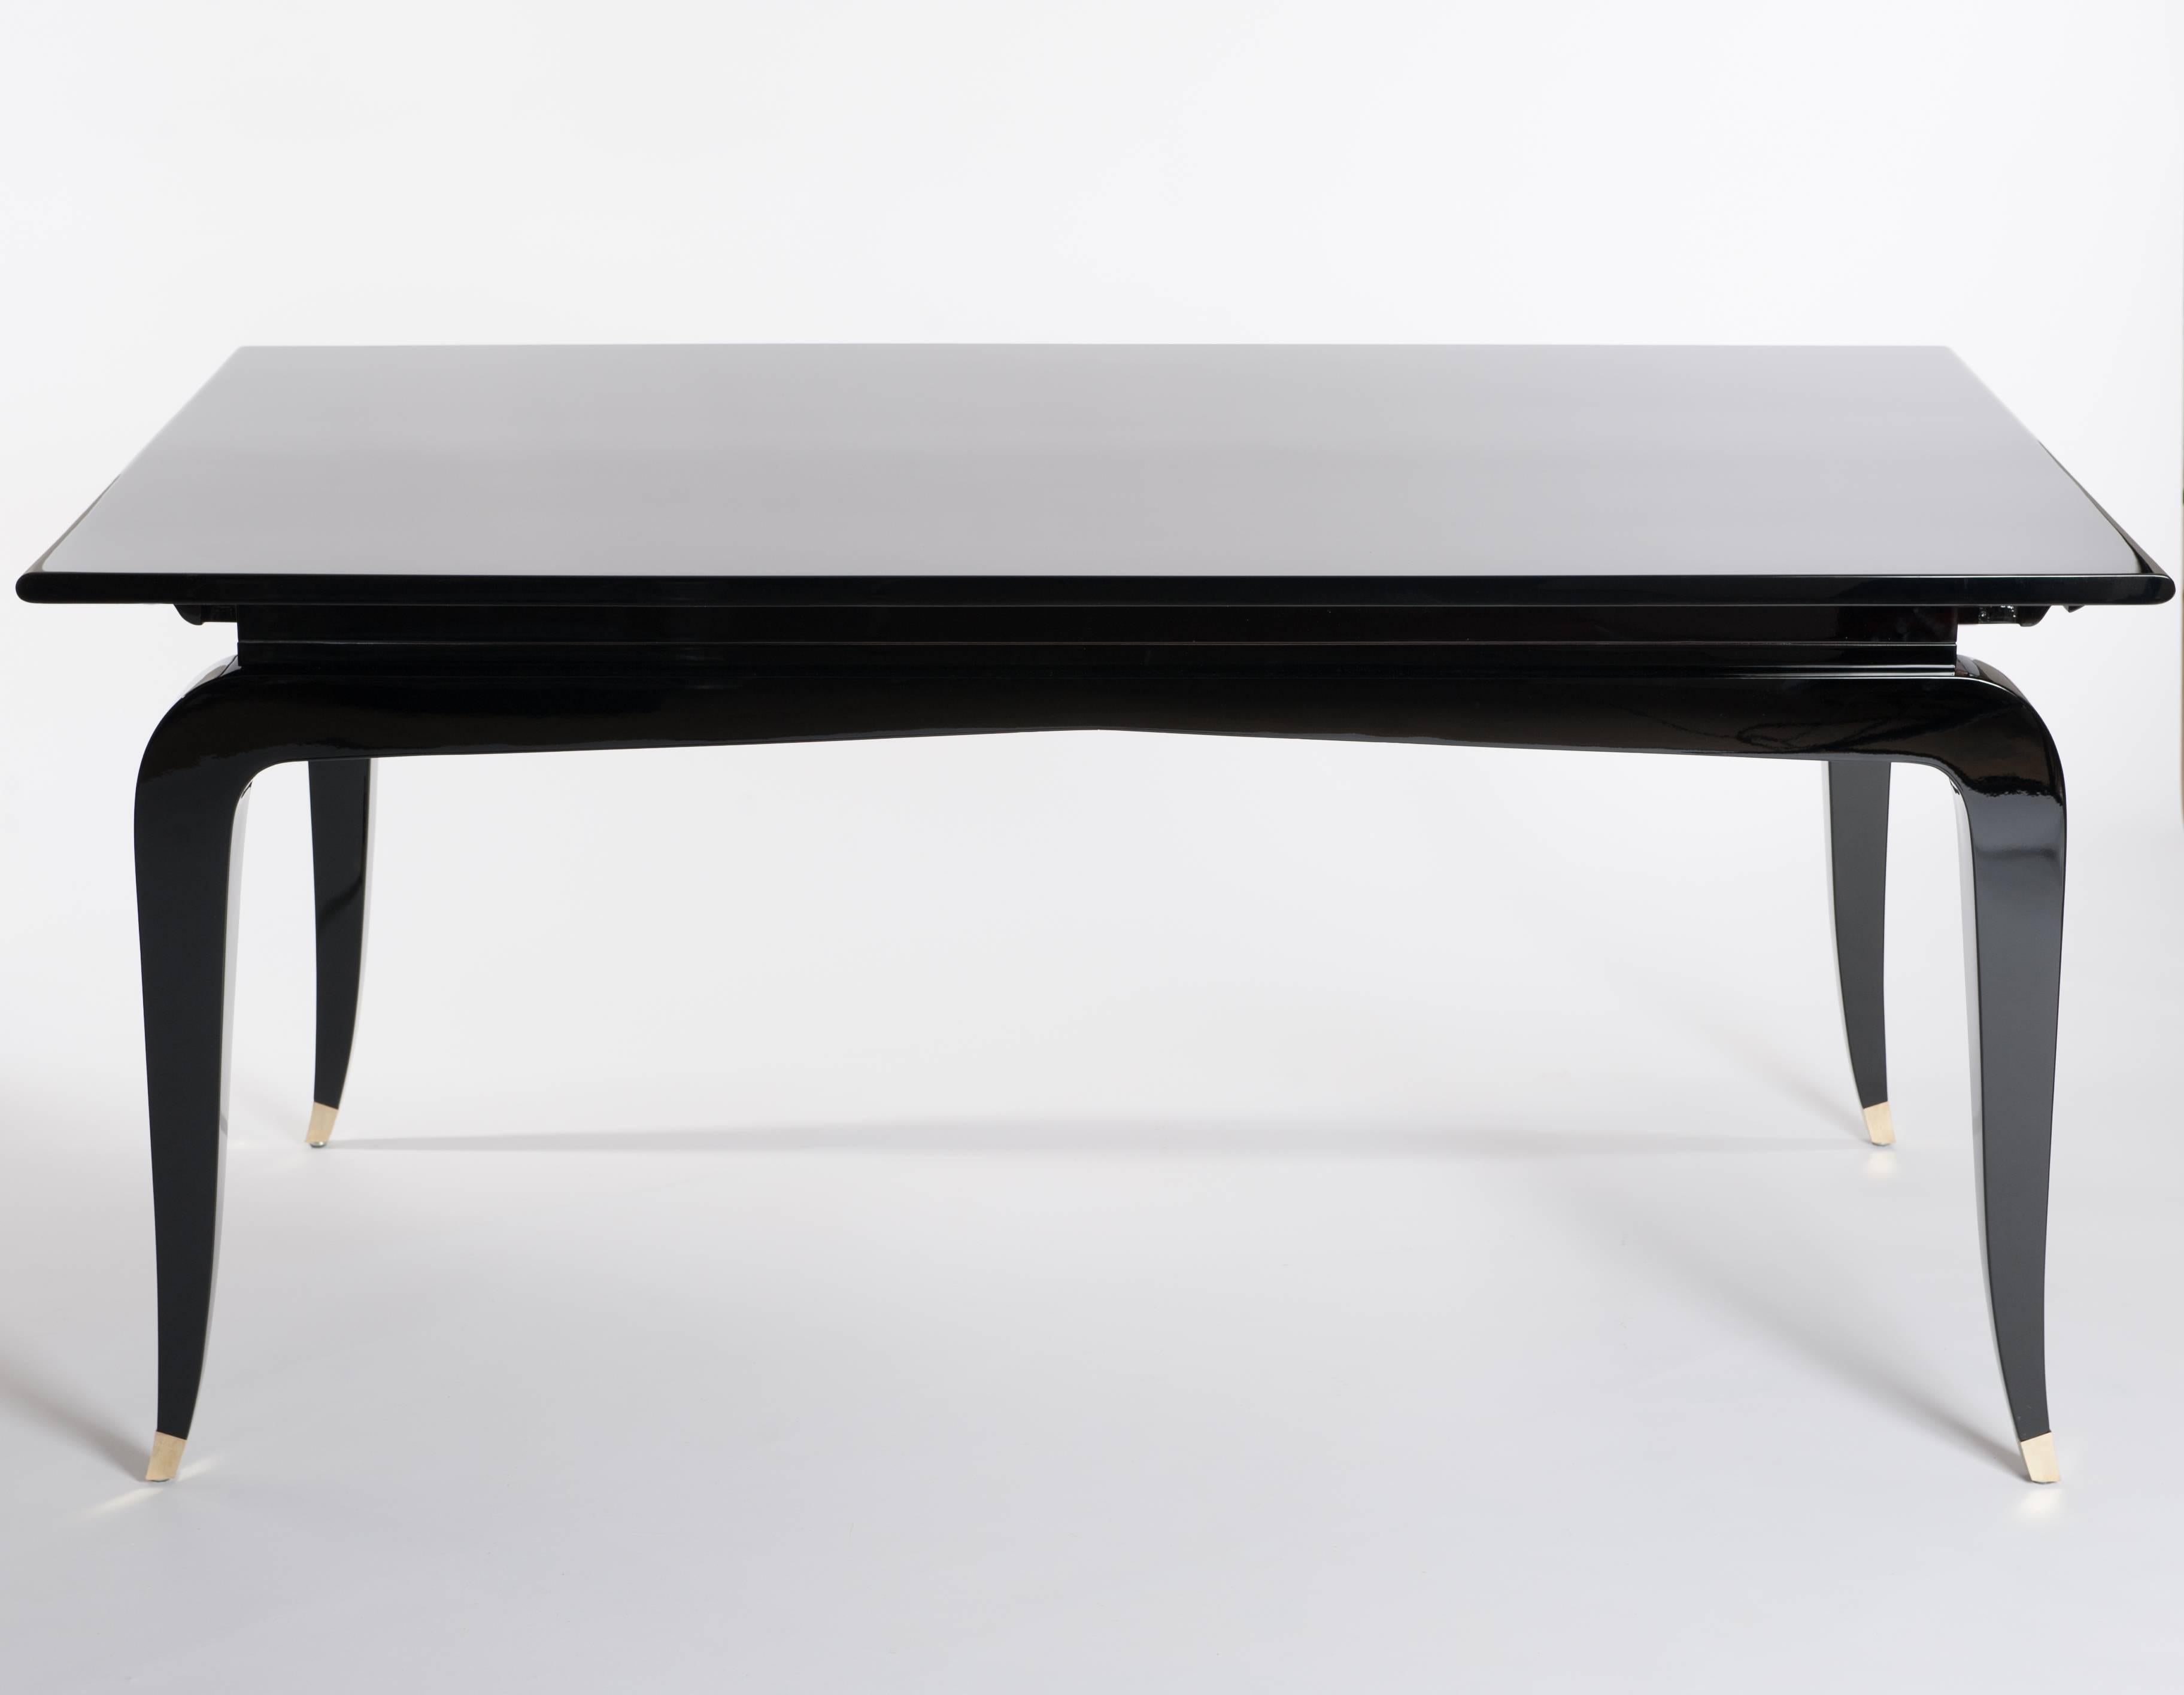 Elegant French Art Deco rectangular dining table (extendable) four tapered legs with bronze trimming.
New Restauration with high gloss shiny-black lacquer on Mahogany wood.
Measure: Extendable with two additional plates to a width of 260cm
Size of